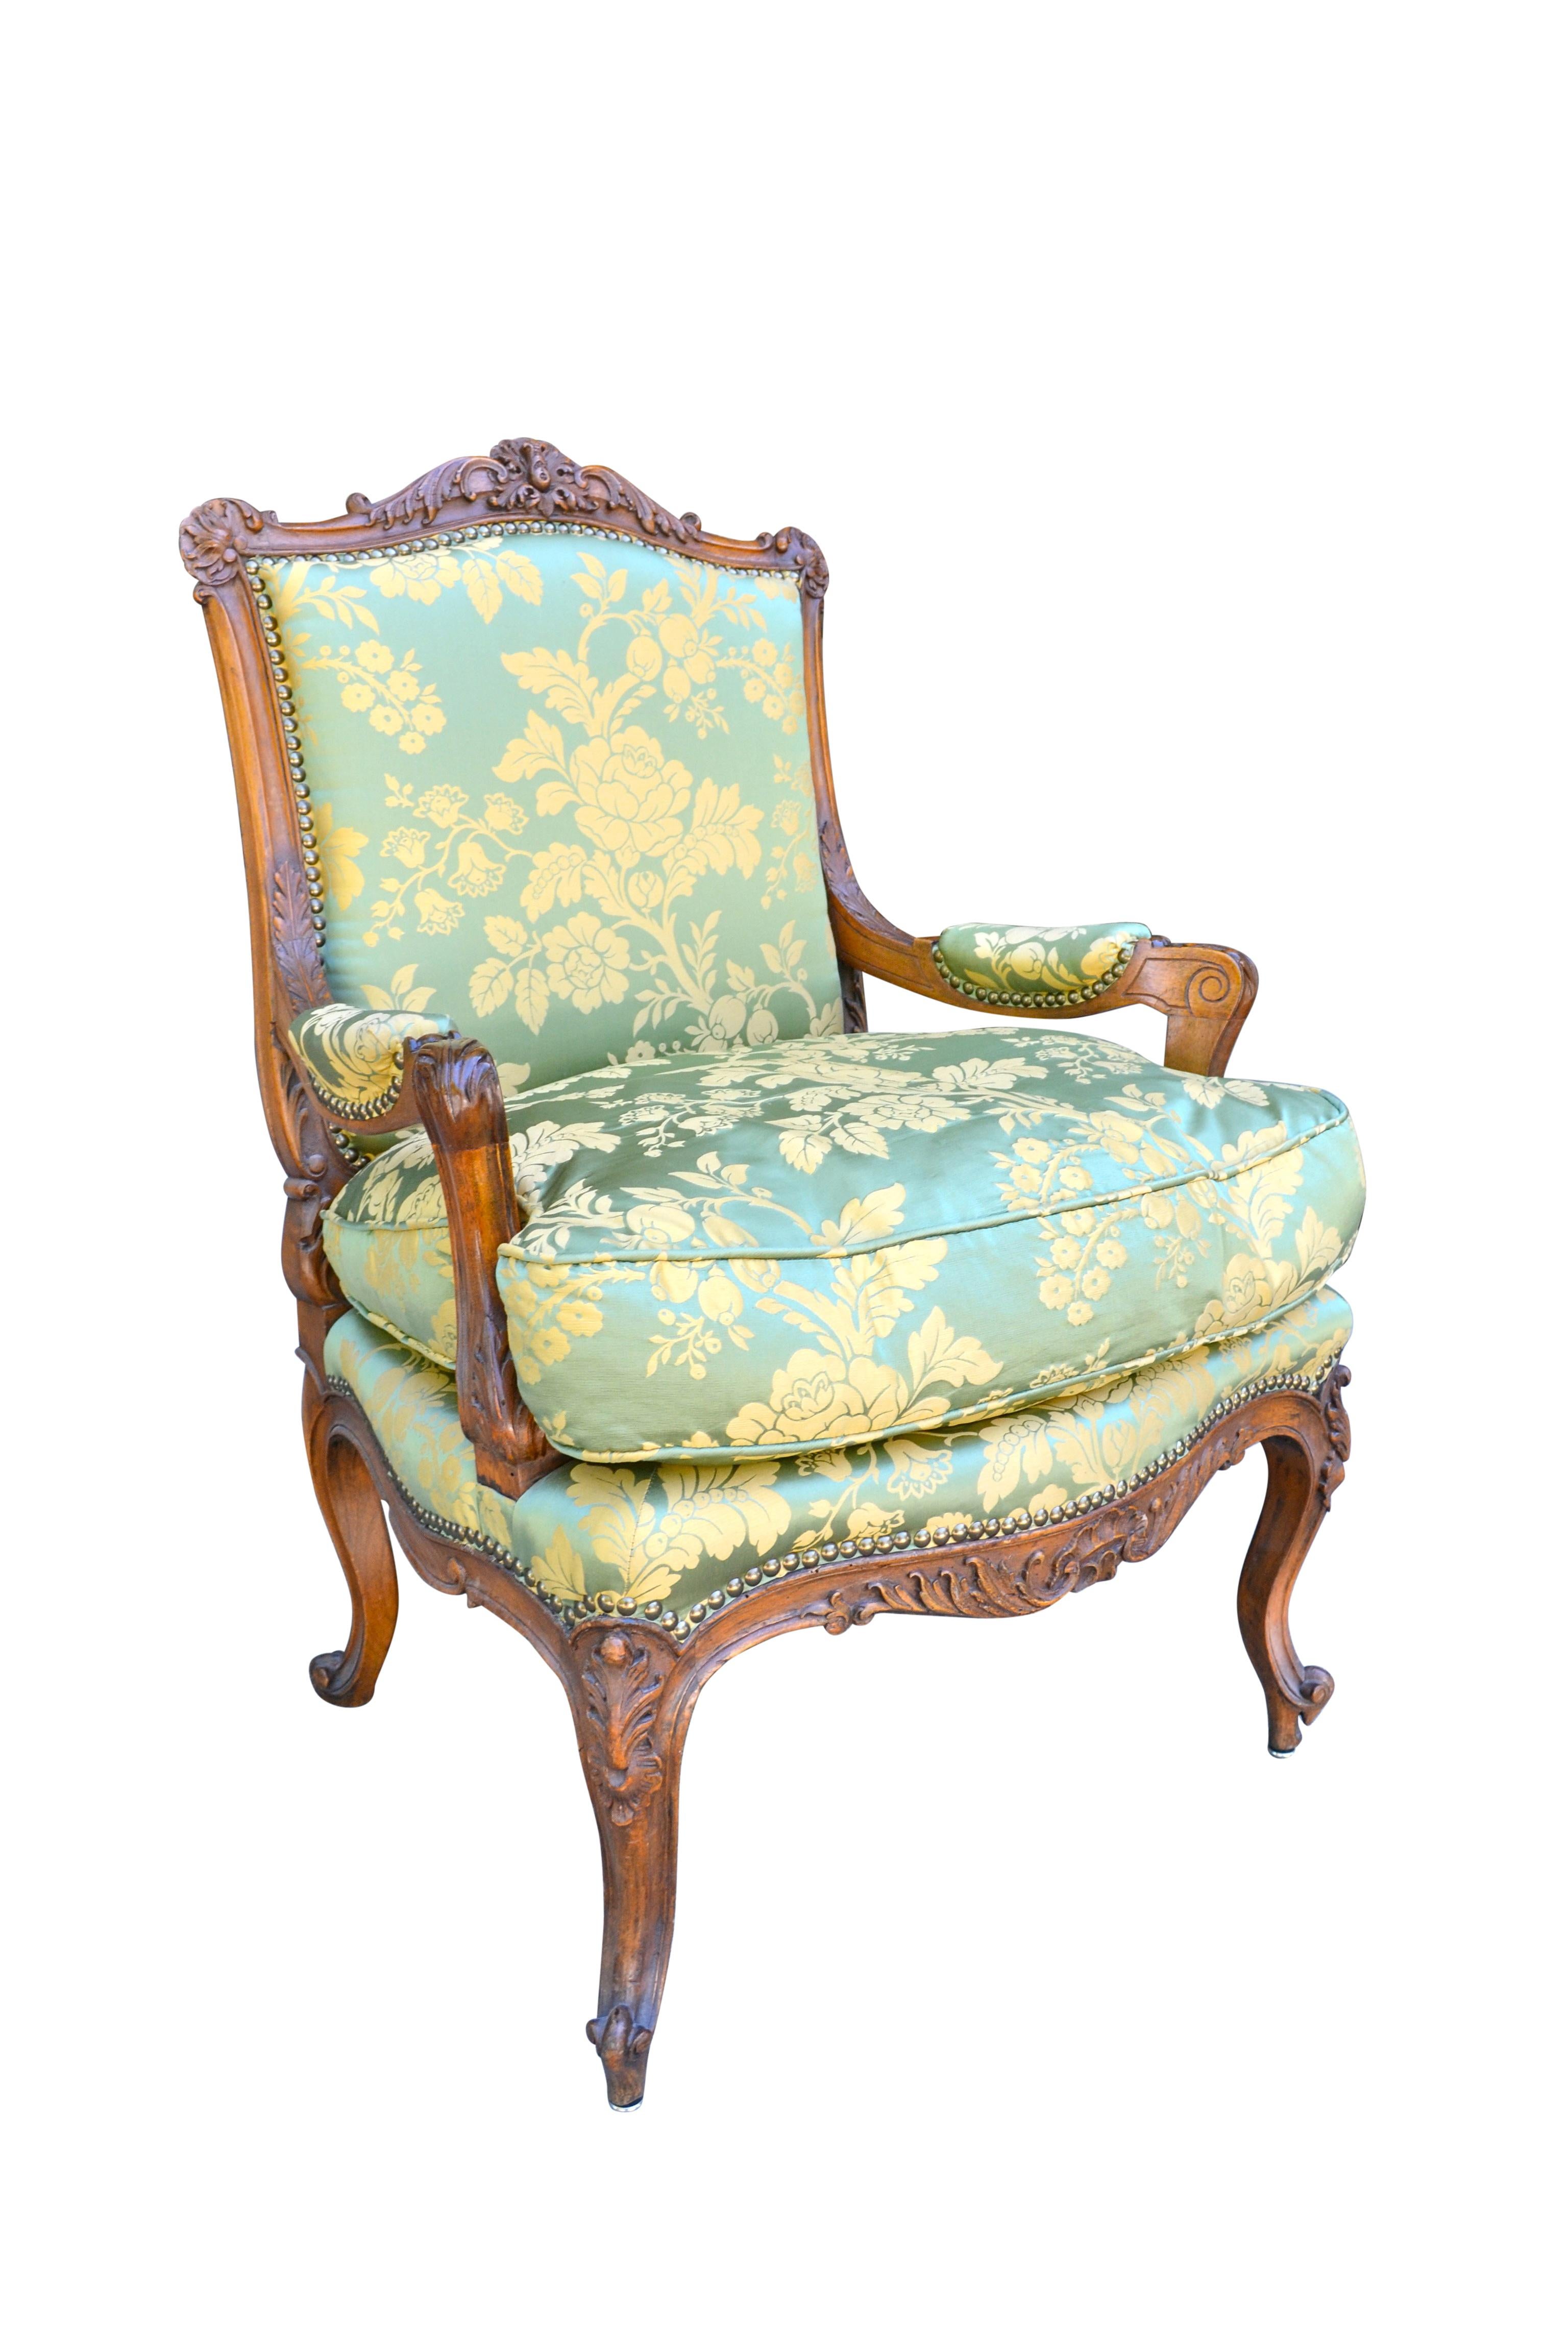 A beautifully carved Louis XV style open armchair the frame in walnut, made in the manner of Charles Crescent one of the more famous 18th century French chair makers. The chair has a loose down filled seat cushion; recently upholstered in new green